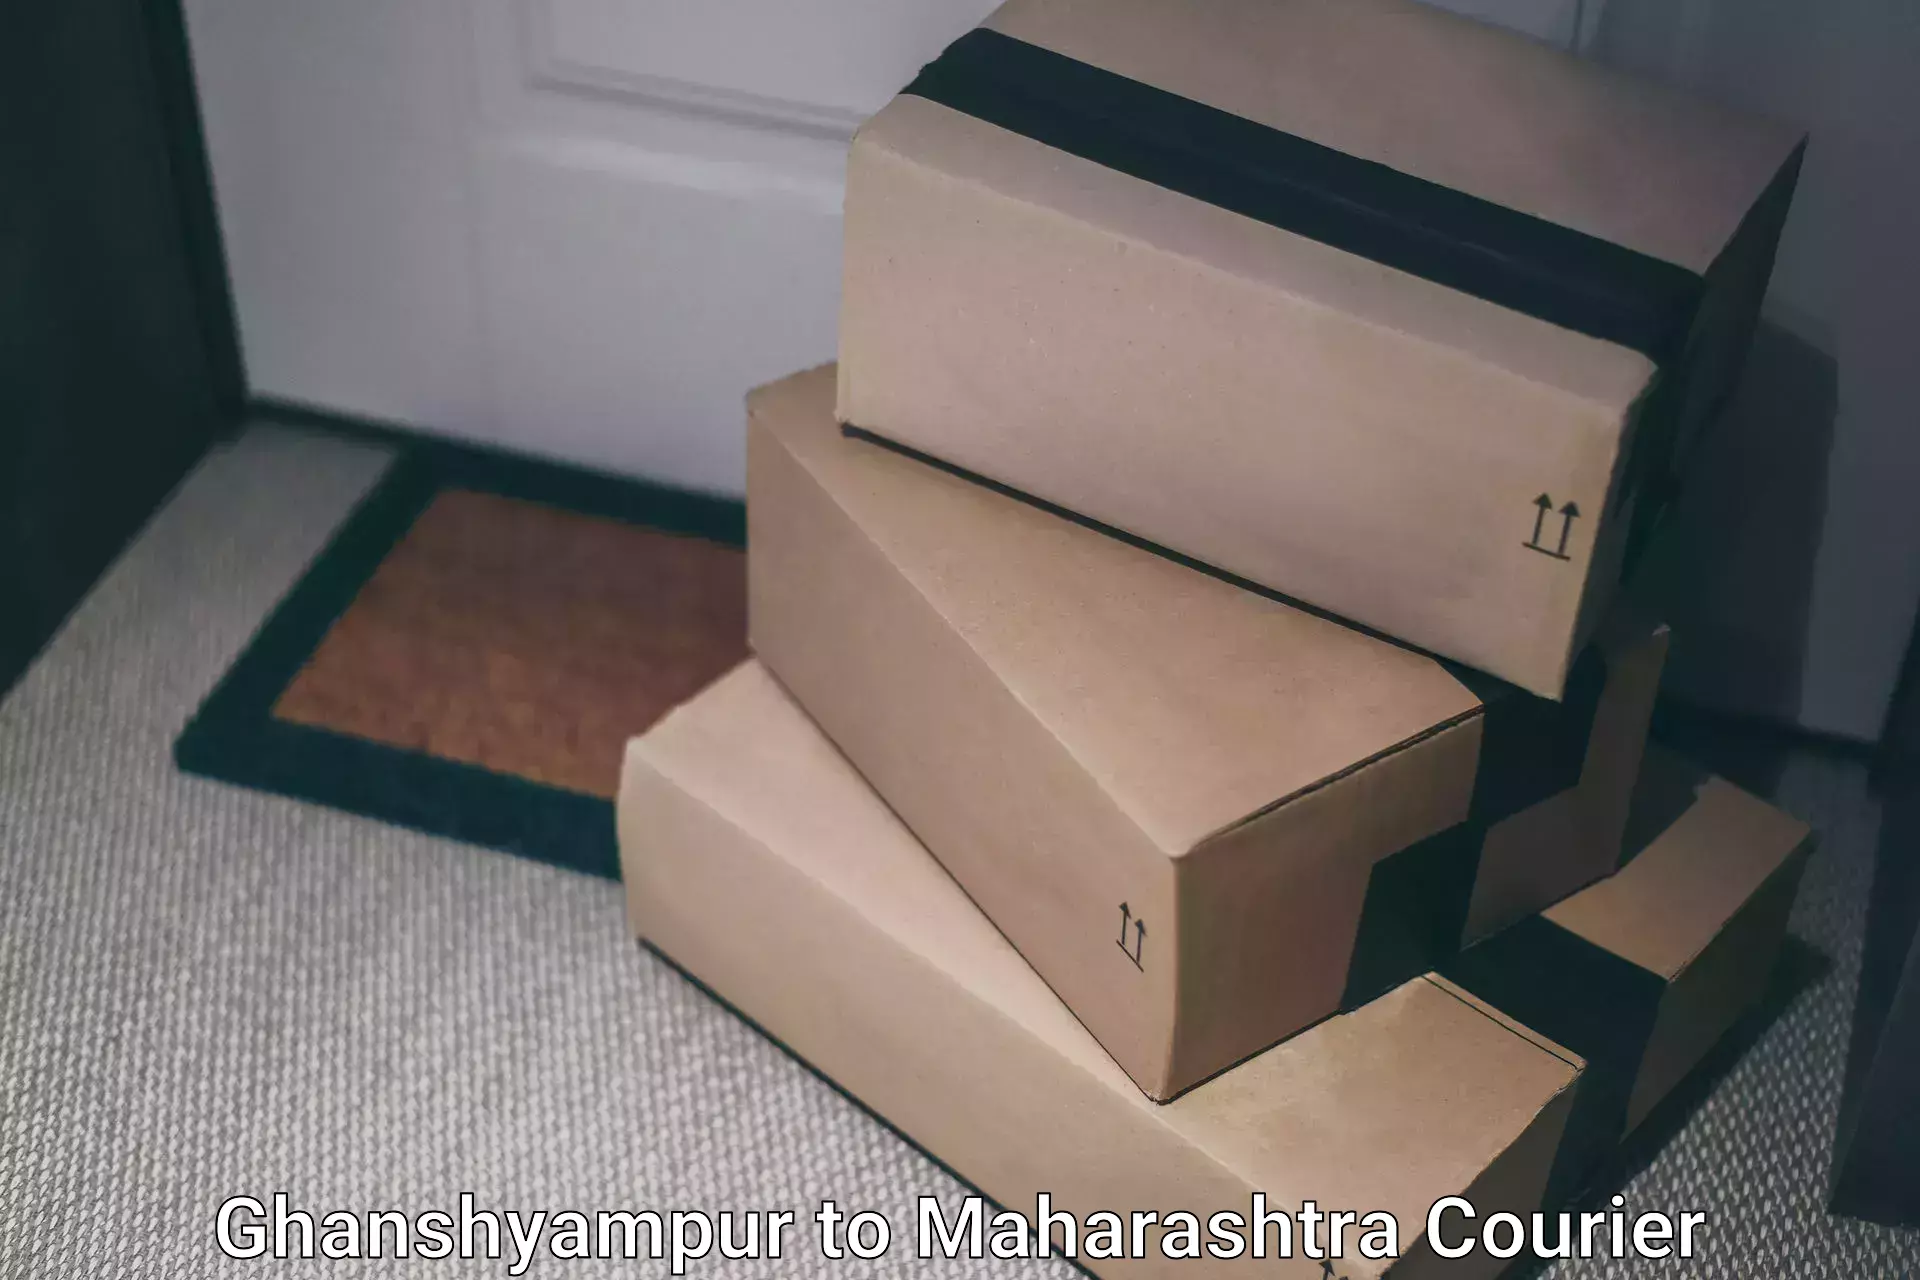 State-of-the-art courier technology Ghanshyampur to Maharashtra